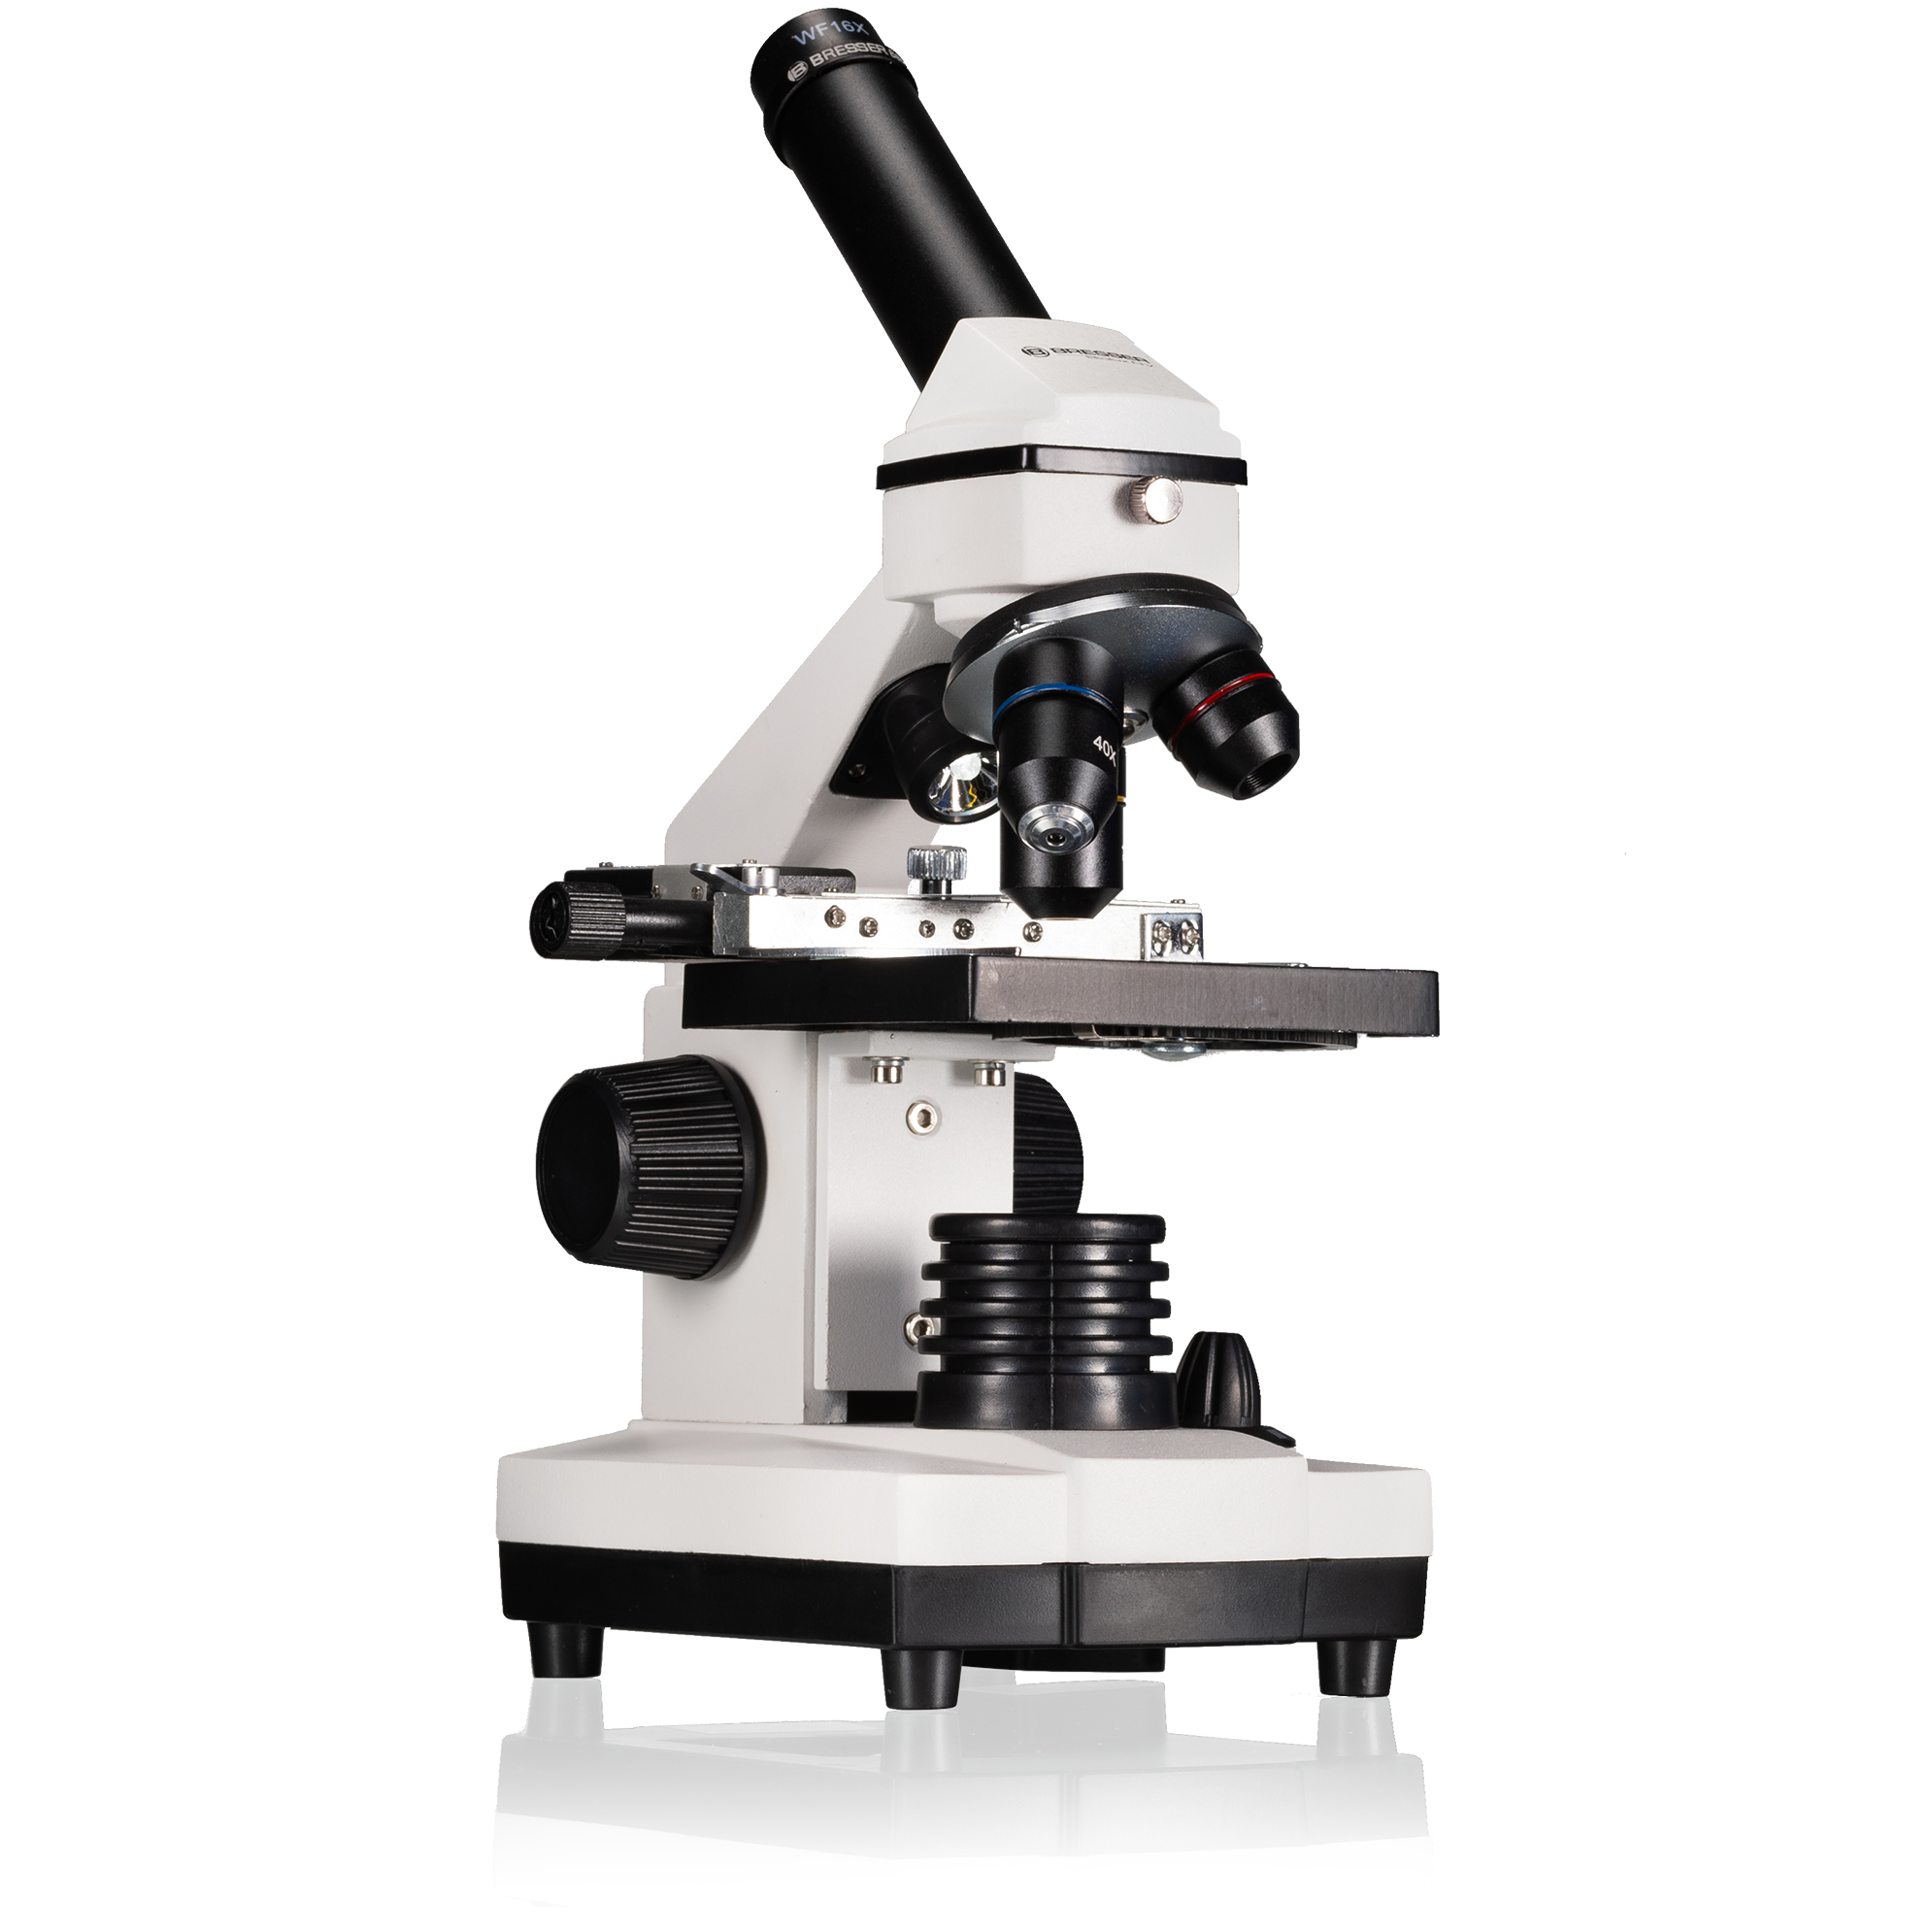 Expand 20x-1280x Bresser Horizon Camera Your USB | with | Biolux Microscope HD NV BRESSER